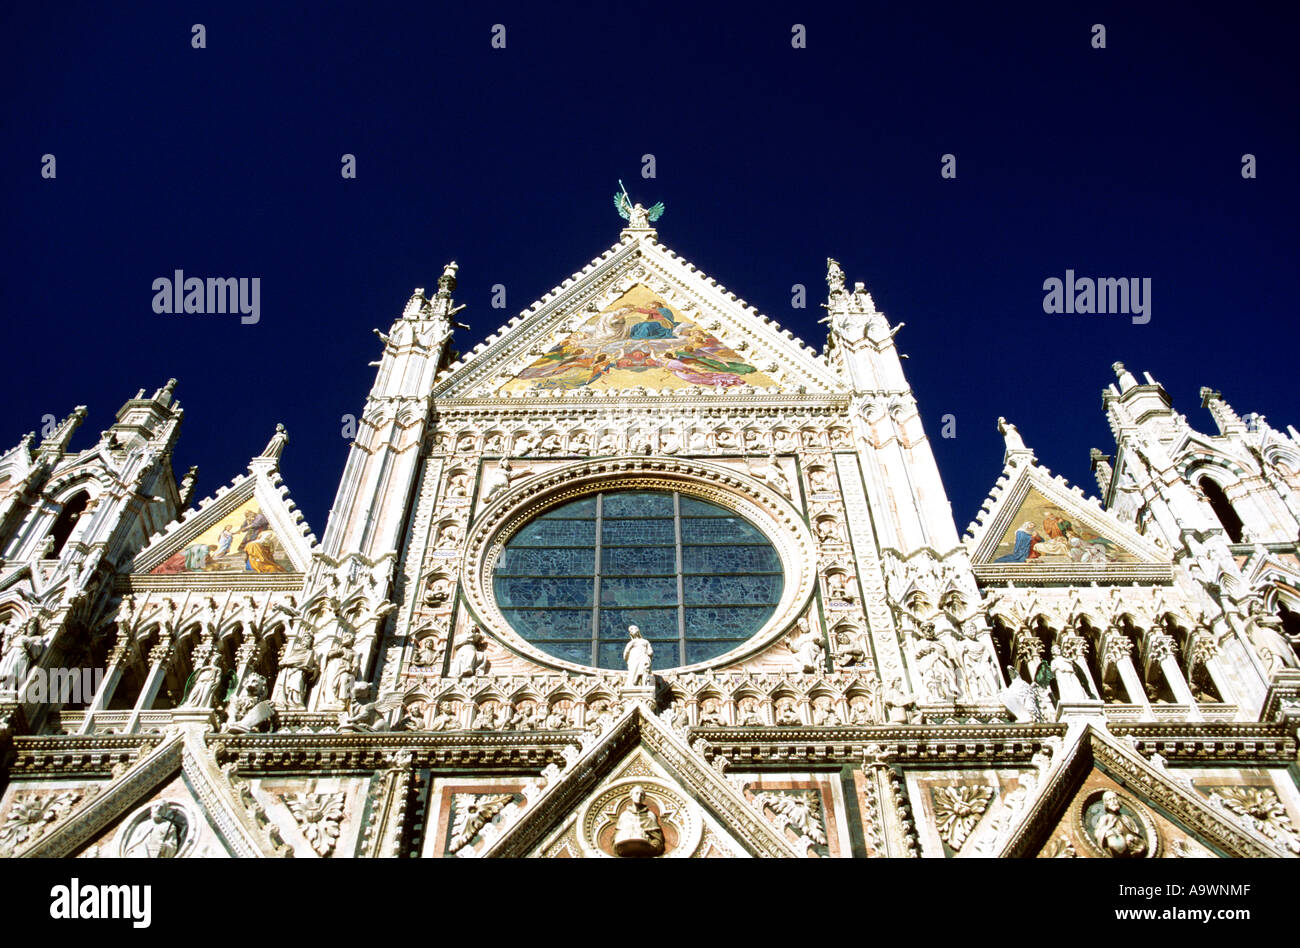 Tuscany, Siena, facade of Duomo cathedral, low angle view Stock Photo